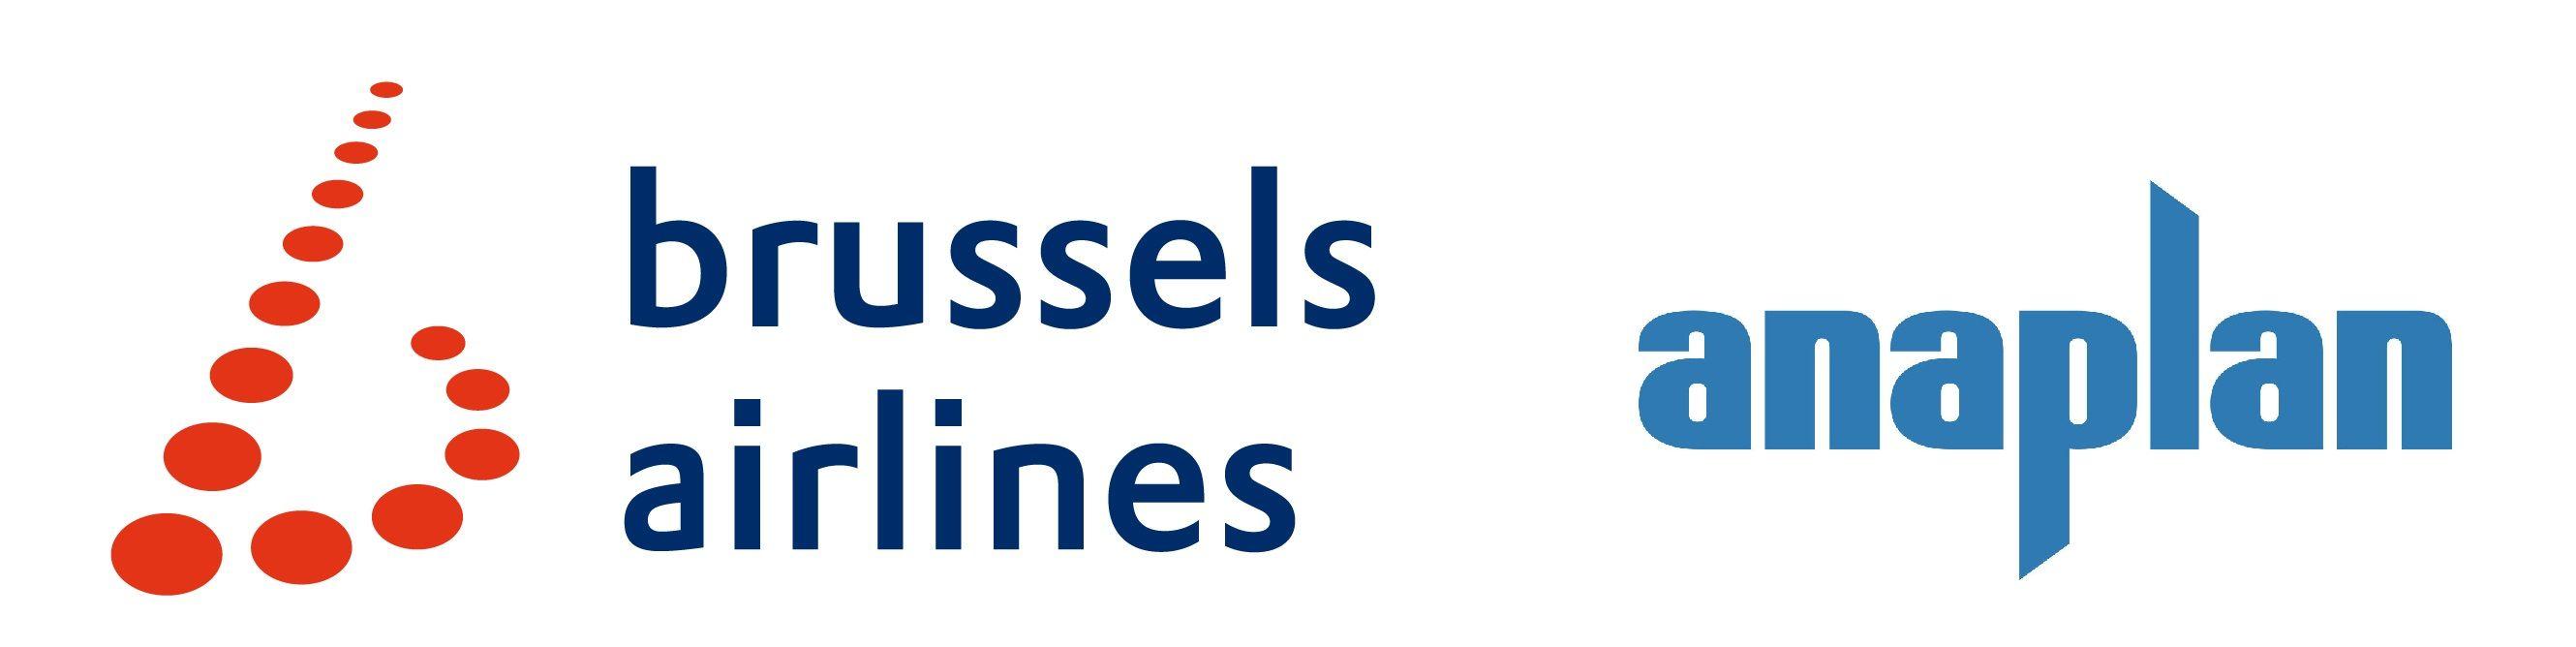 Brussels Airlines Logo - Brussels Airlines Chooses Anaplan for Heightened Financial Planning ...